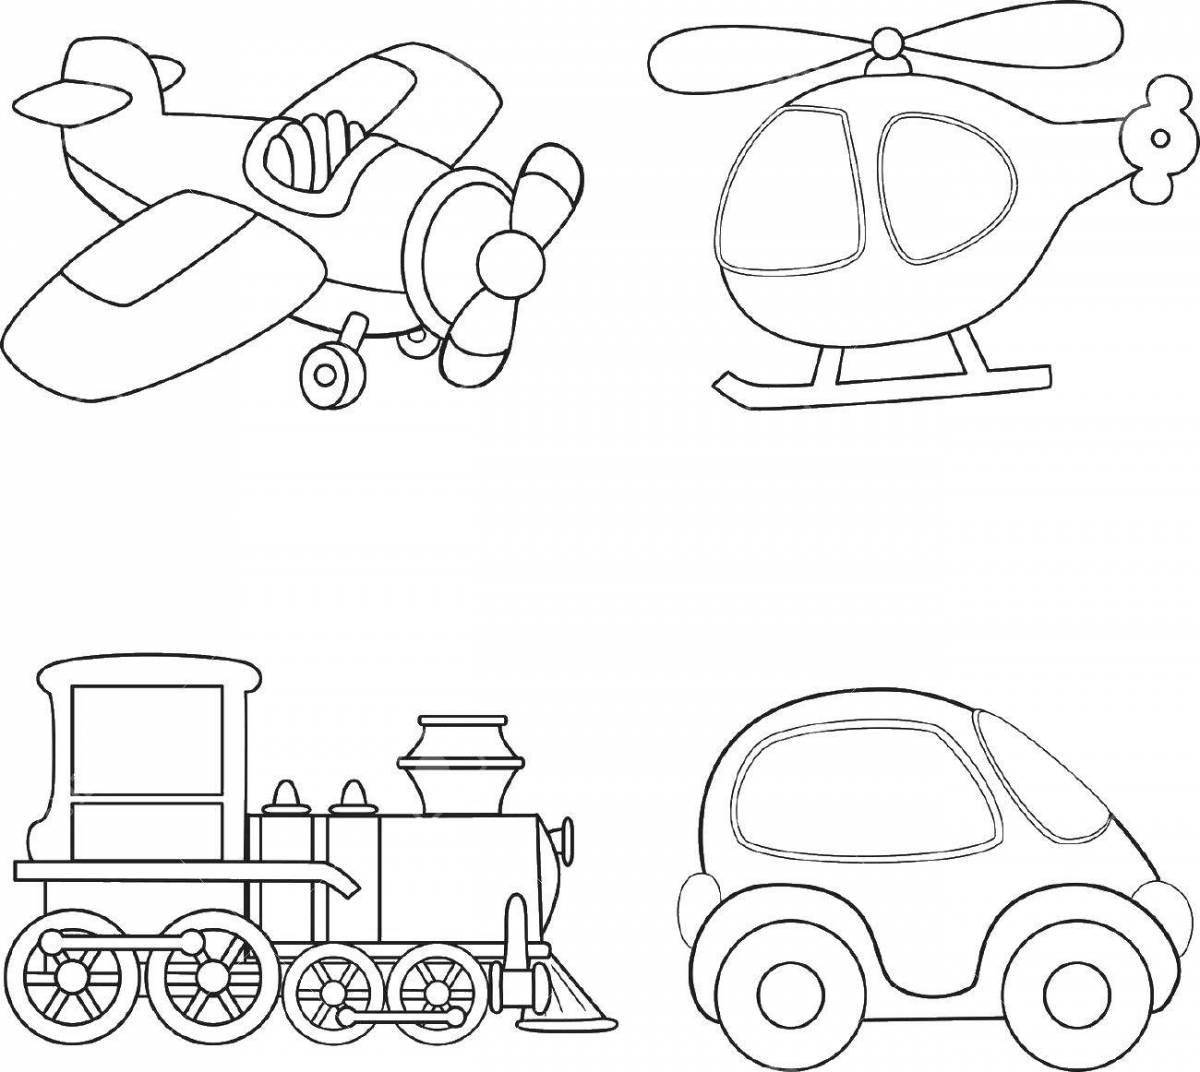 Colorful modes of transport coloring book